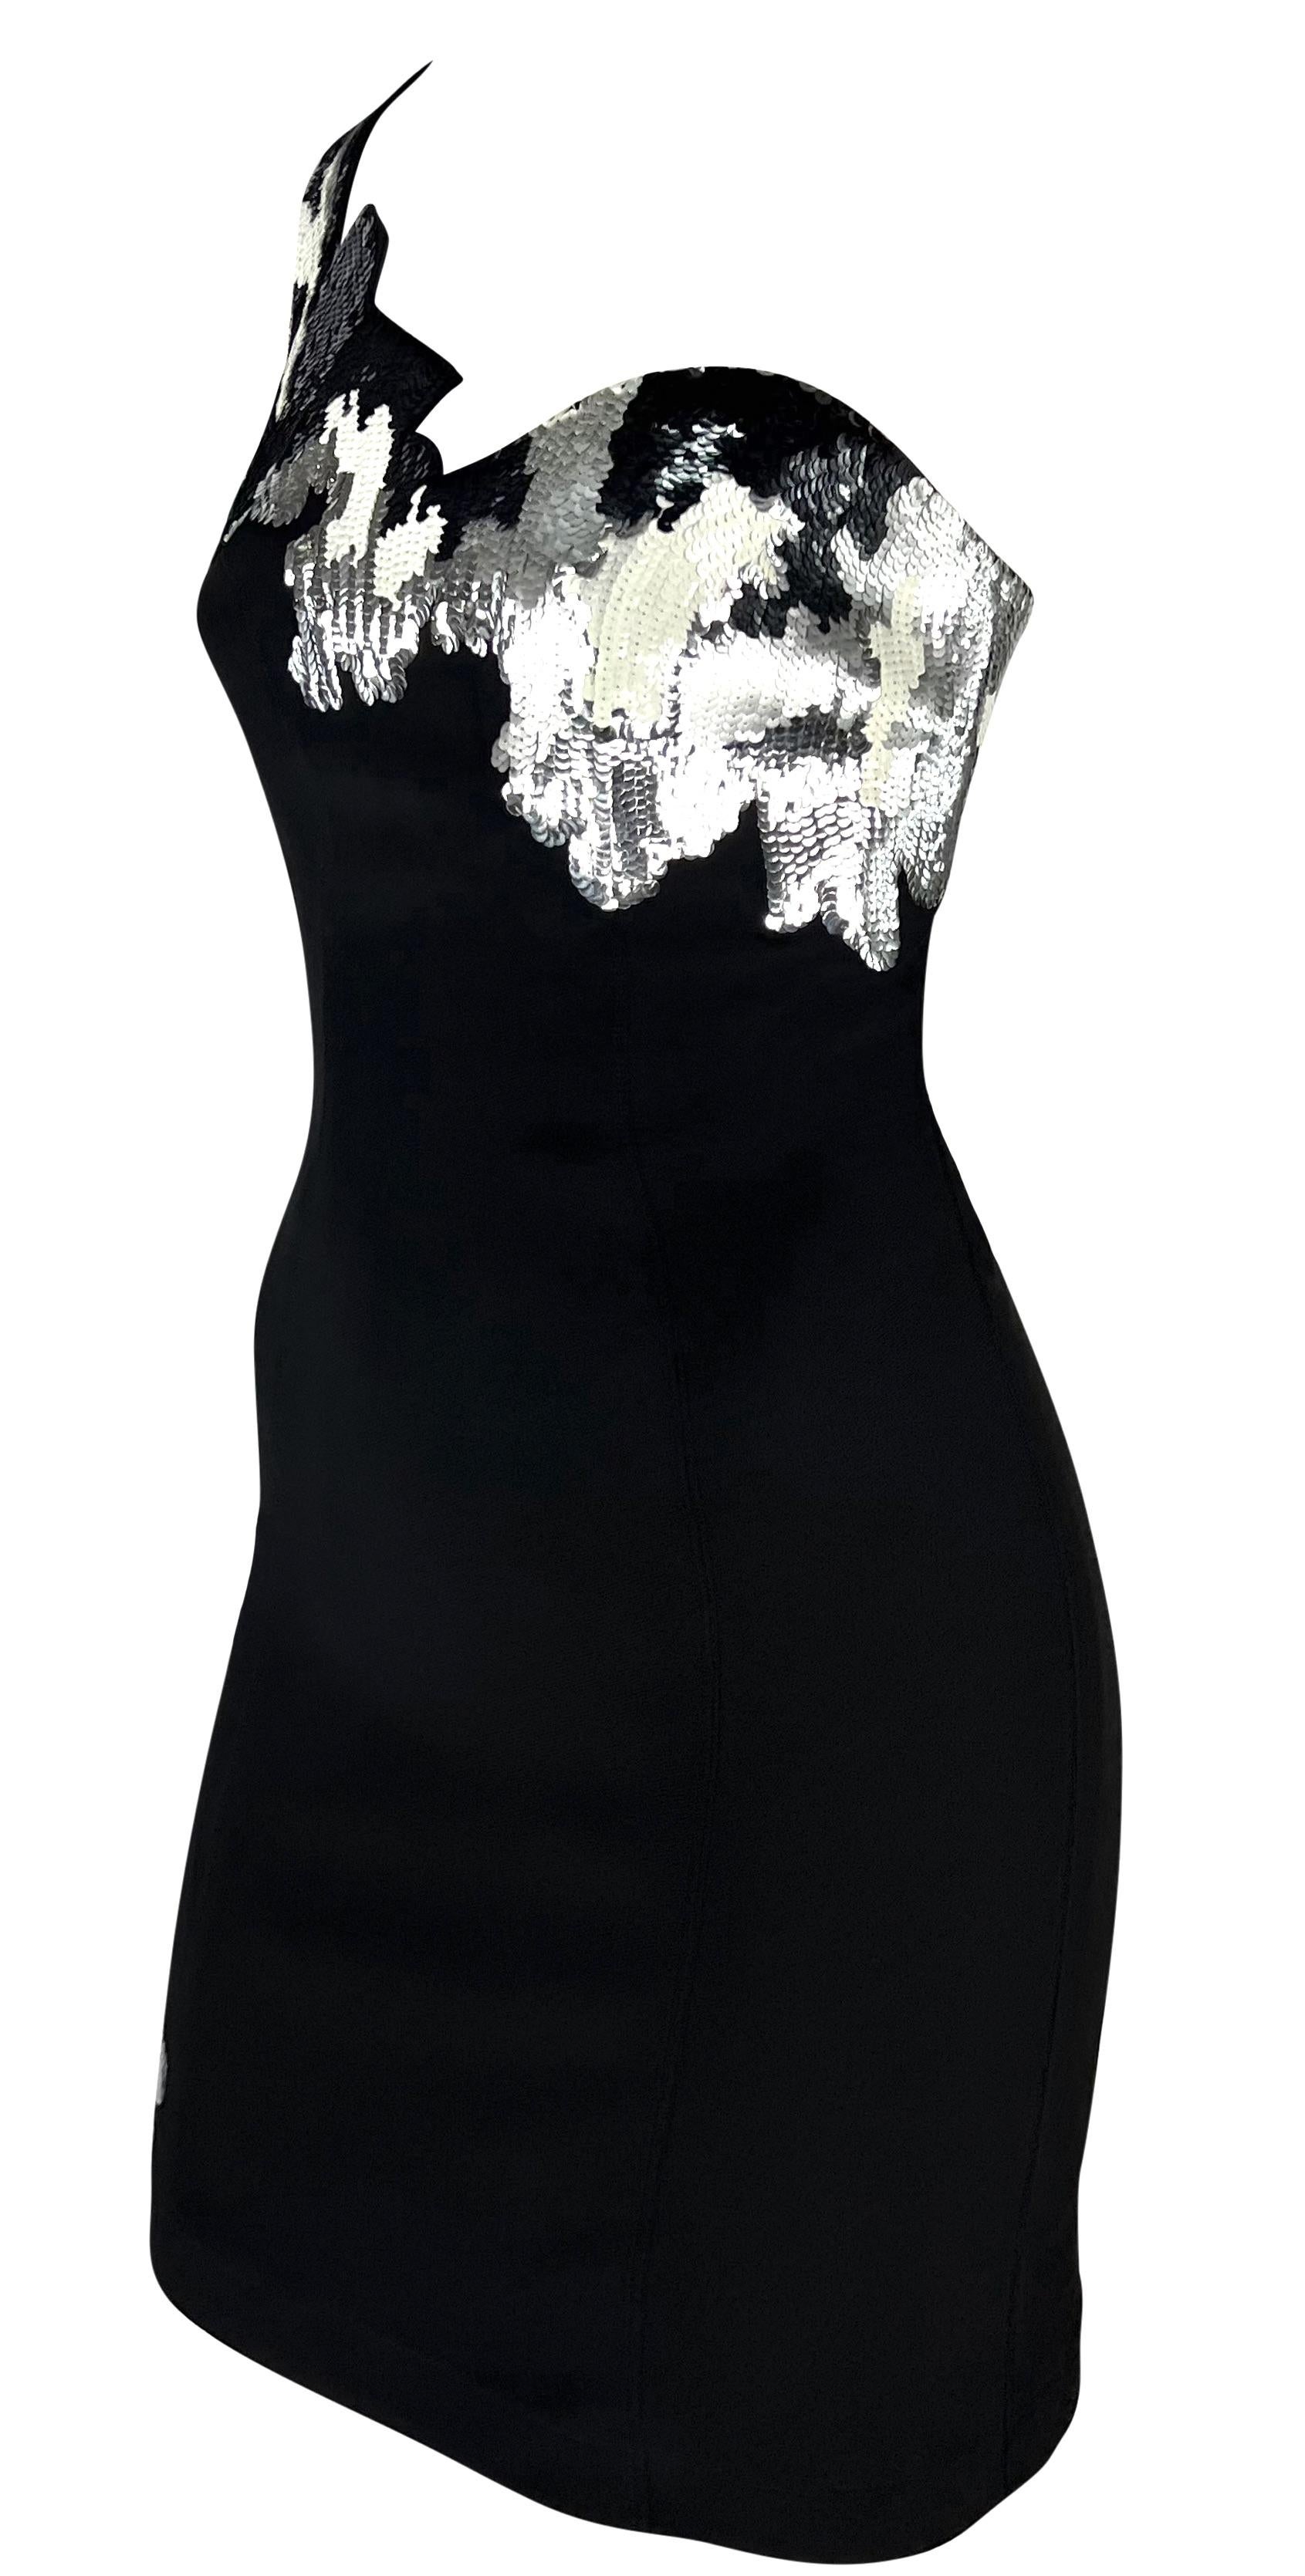 F/W 1989 Thierry Mugler Black White Silver Sequin Asymmetric Jagged Edge Dress For Sale 3